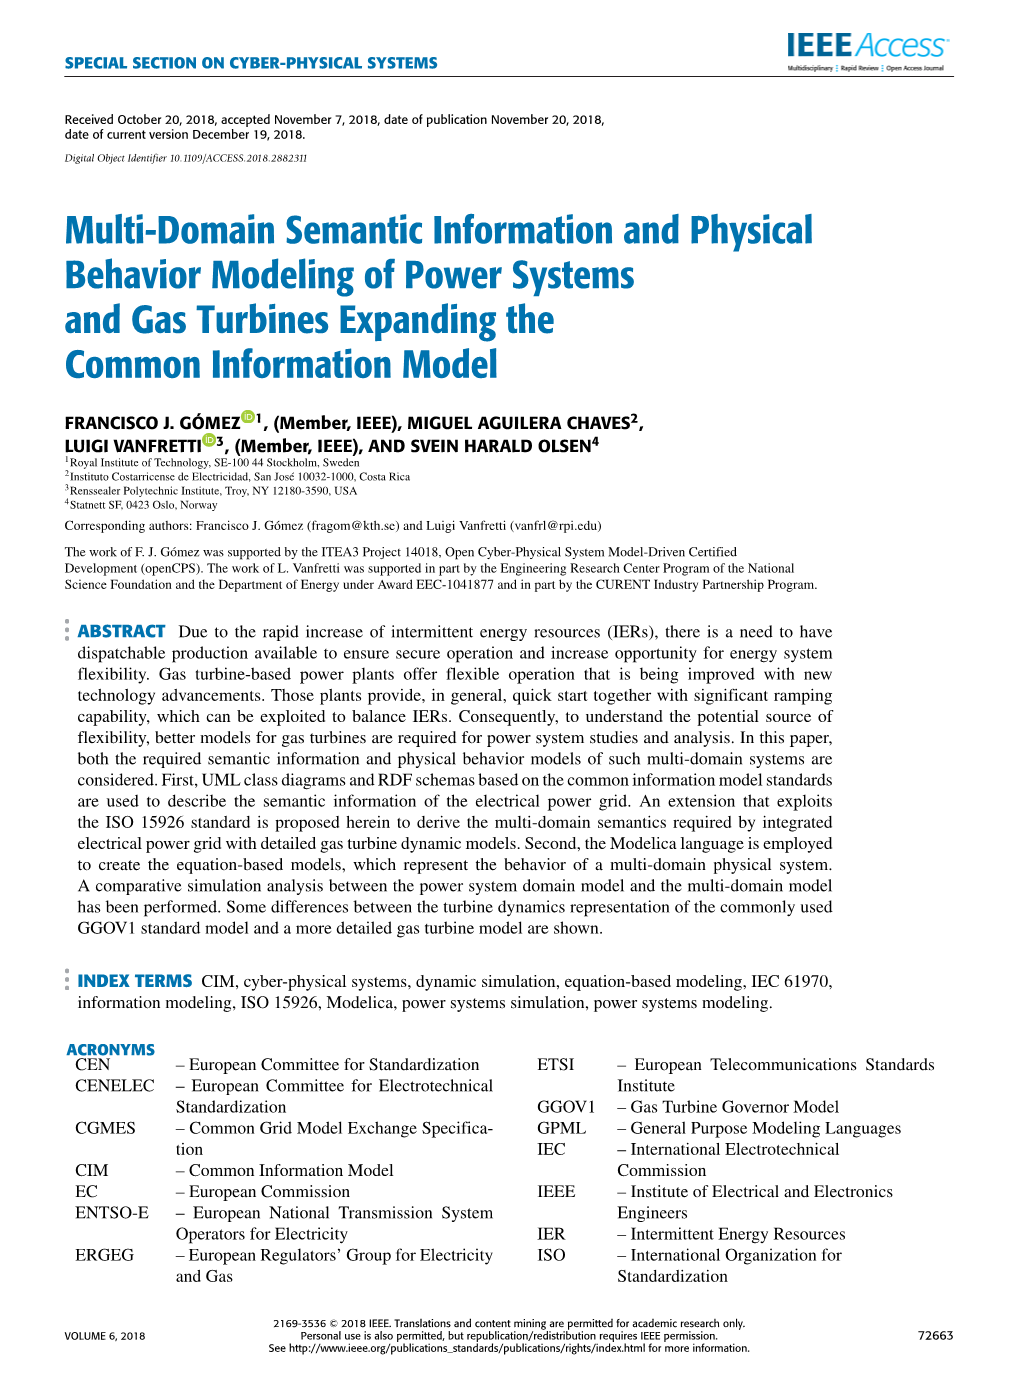 Multi-Domain Semantic Information and Physical Behavior Modeling of Power Systems and Gas Turbines Expanding the Common Information Model